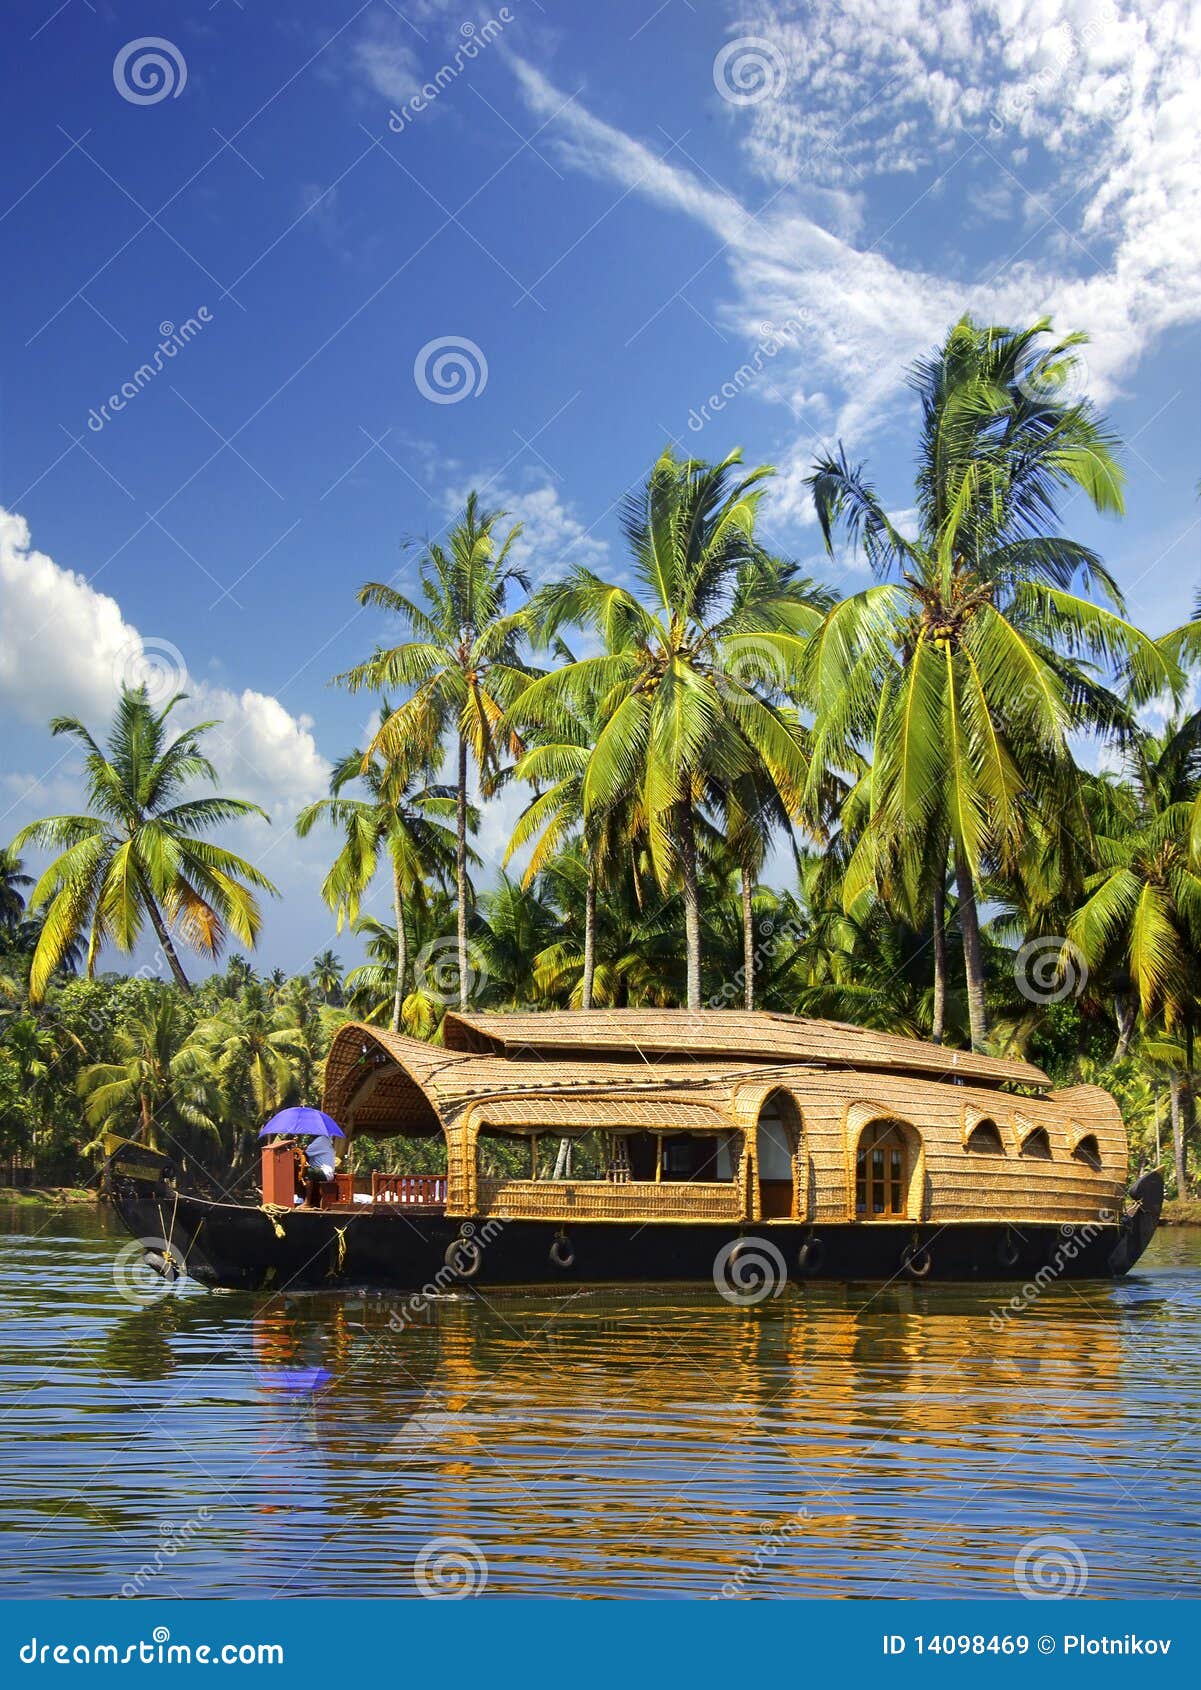 houseboat in backwaters, india